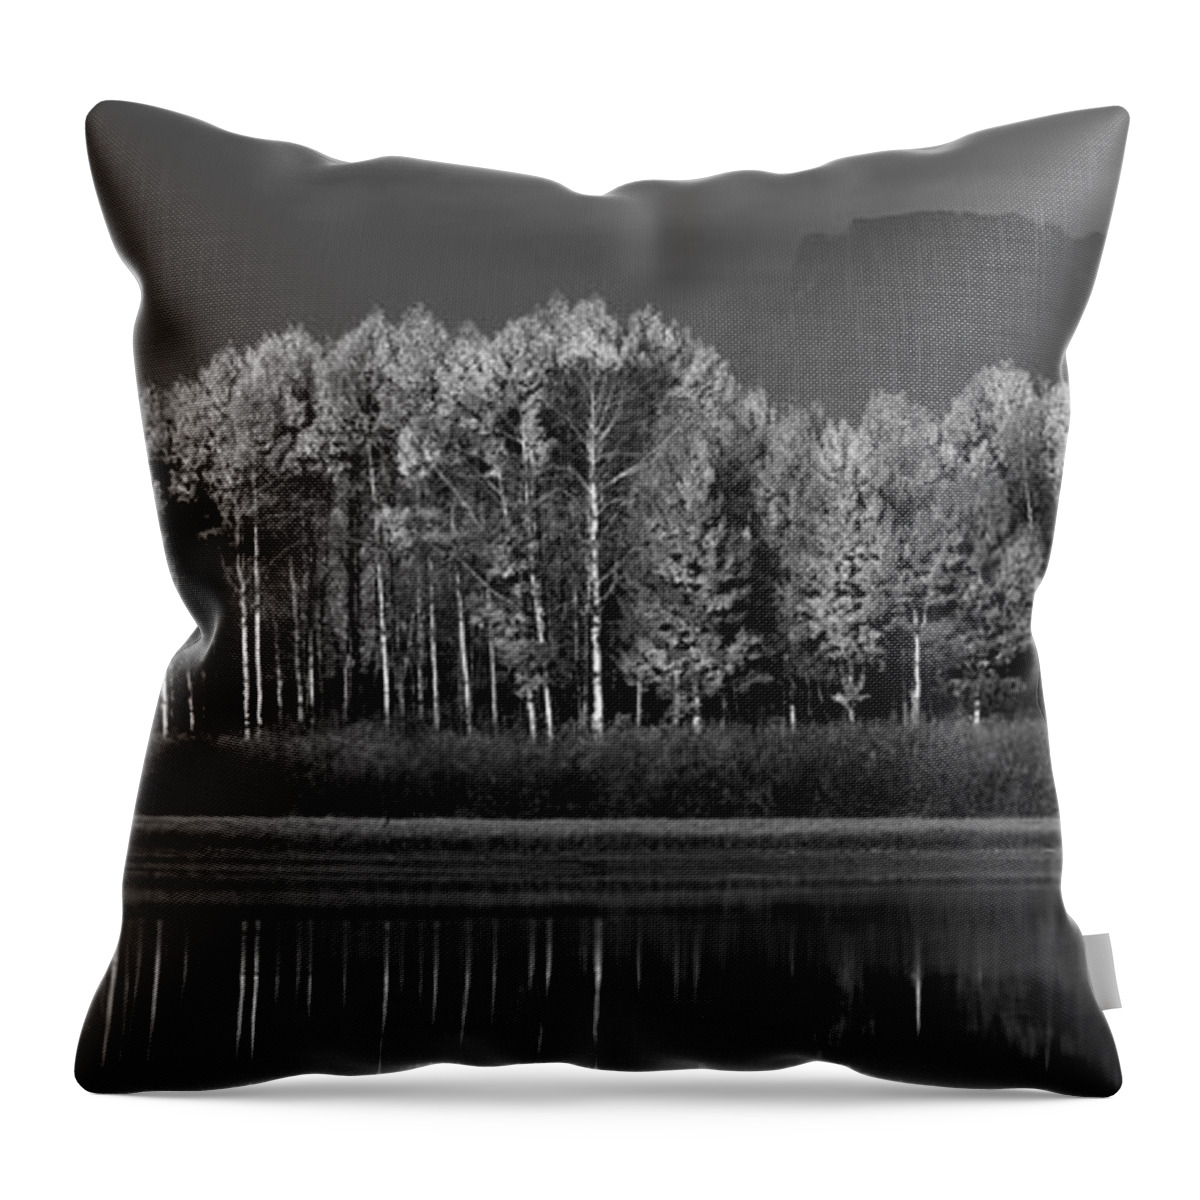 Aspen Throw Pillow featuring the photograph Last Sentinels Greyscale Pano by David Andersen